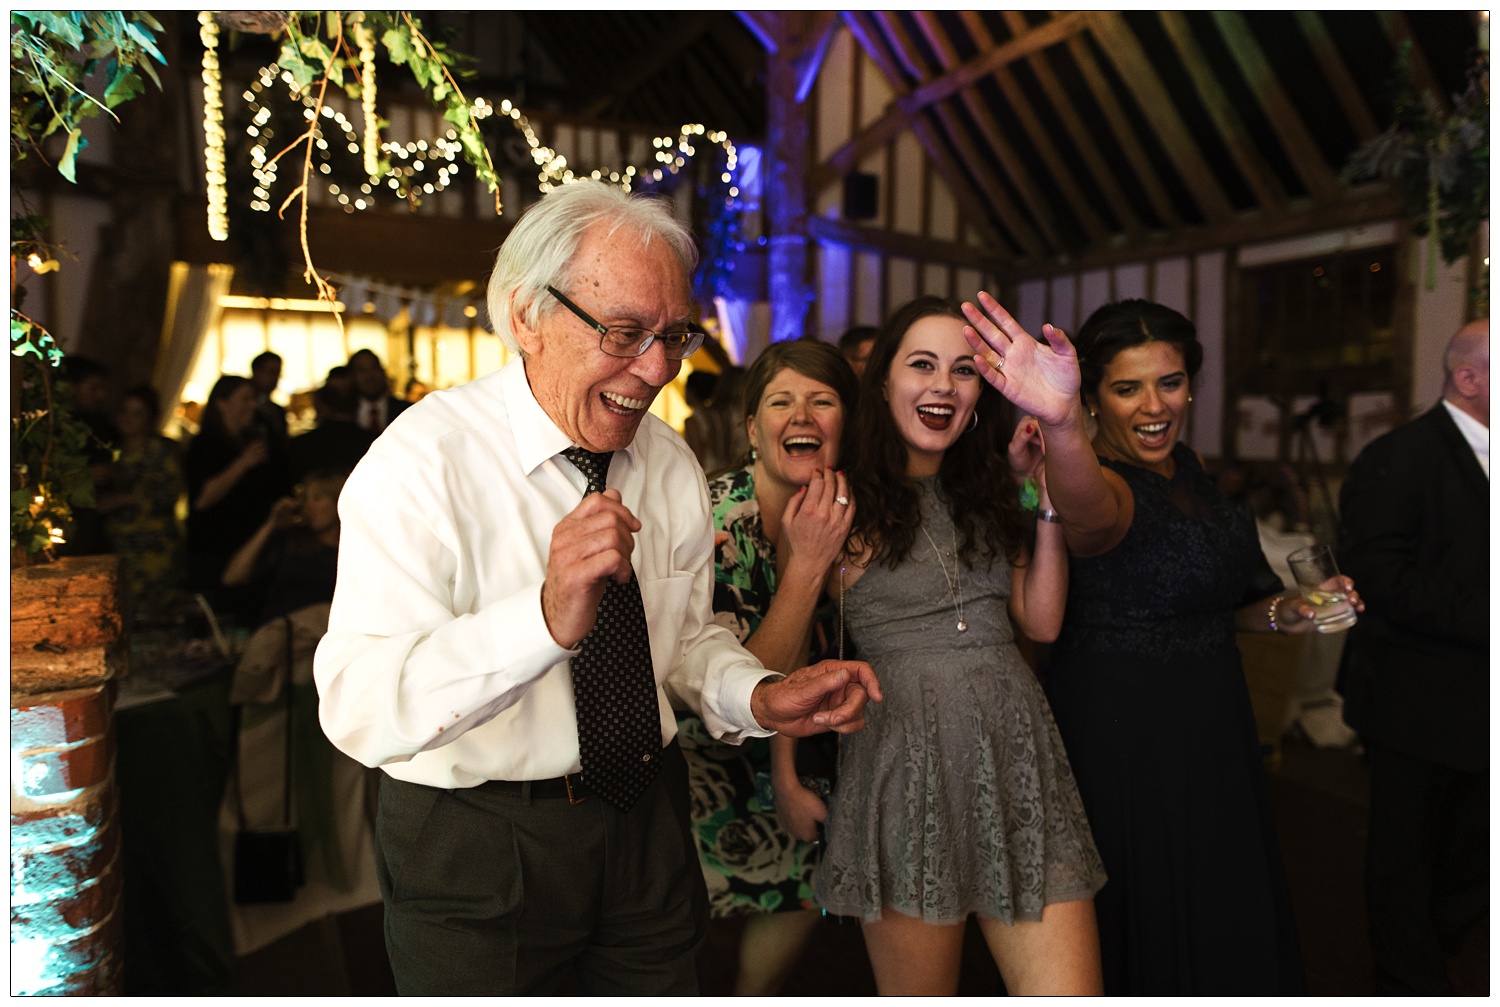 An elderly man is dancing at a wedding reception with three women. They are in Pledgdon Barn and there are fairy lights.